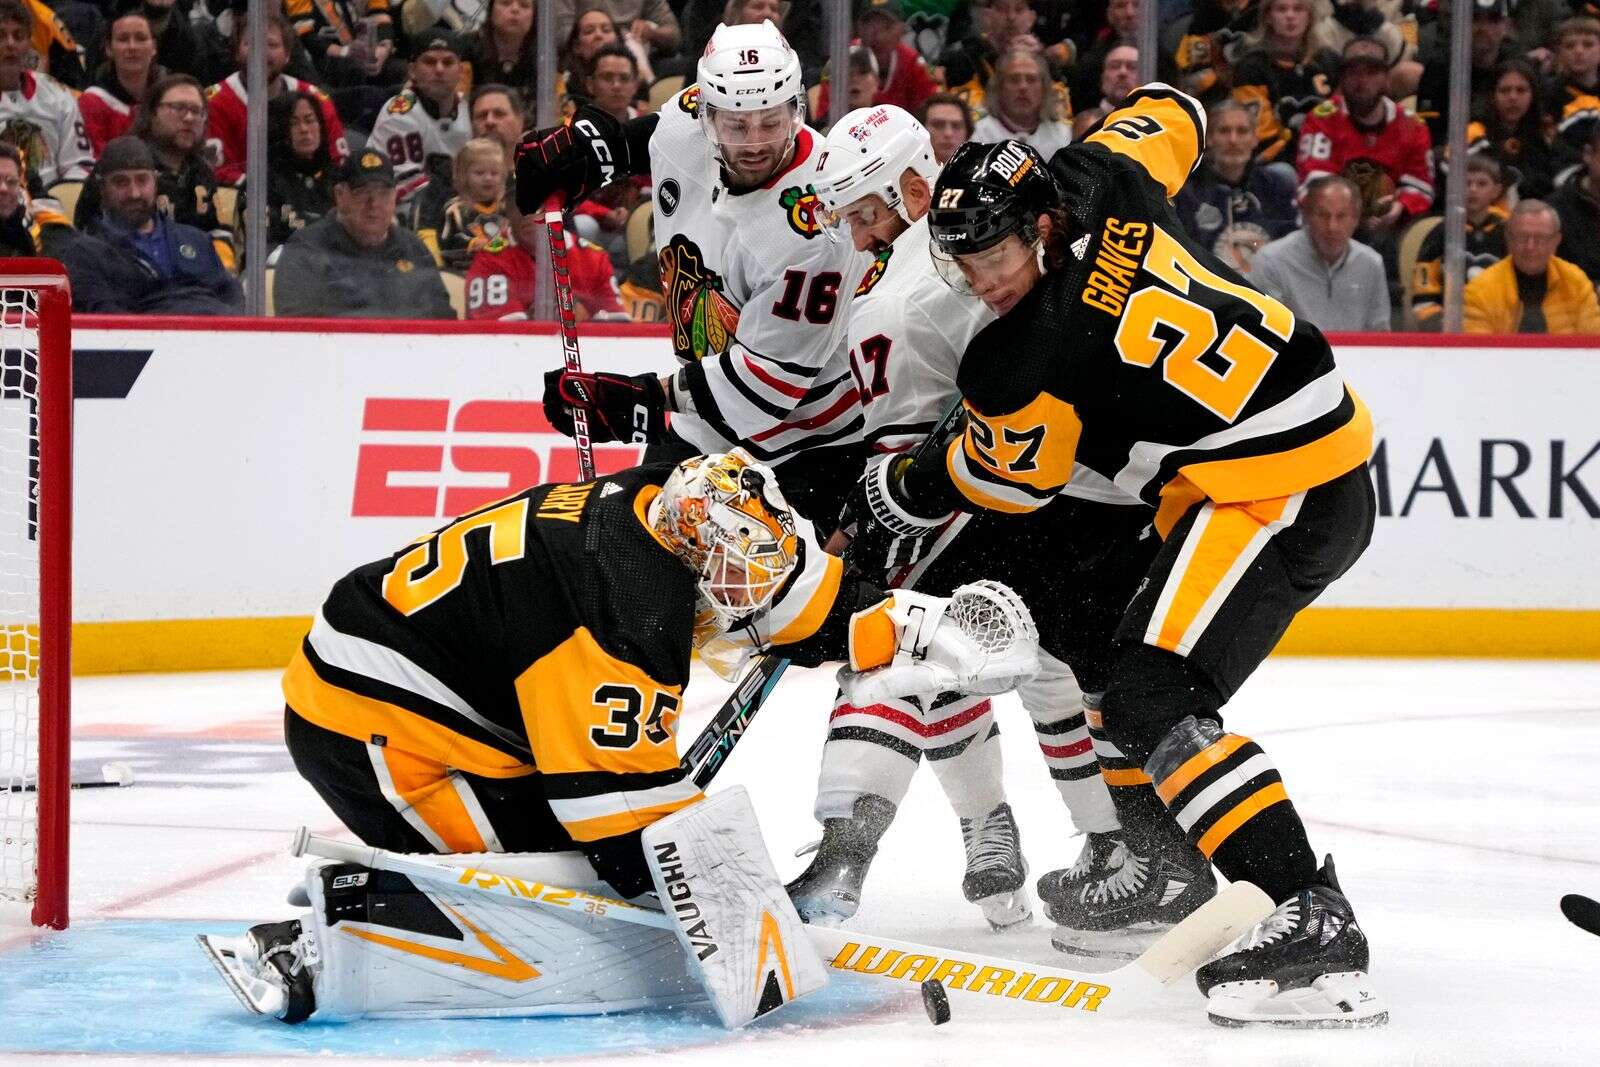 Connor Bedard picks up an assist in his NHL debut as the Blackhawks rally  past Crosby, Penguins 4-2